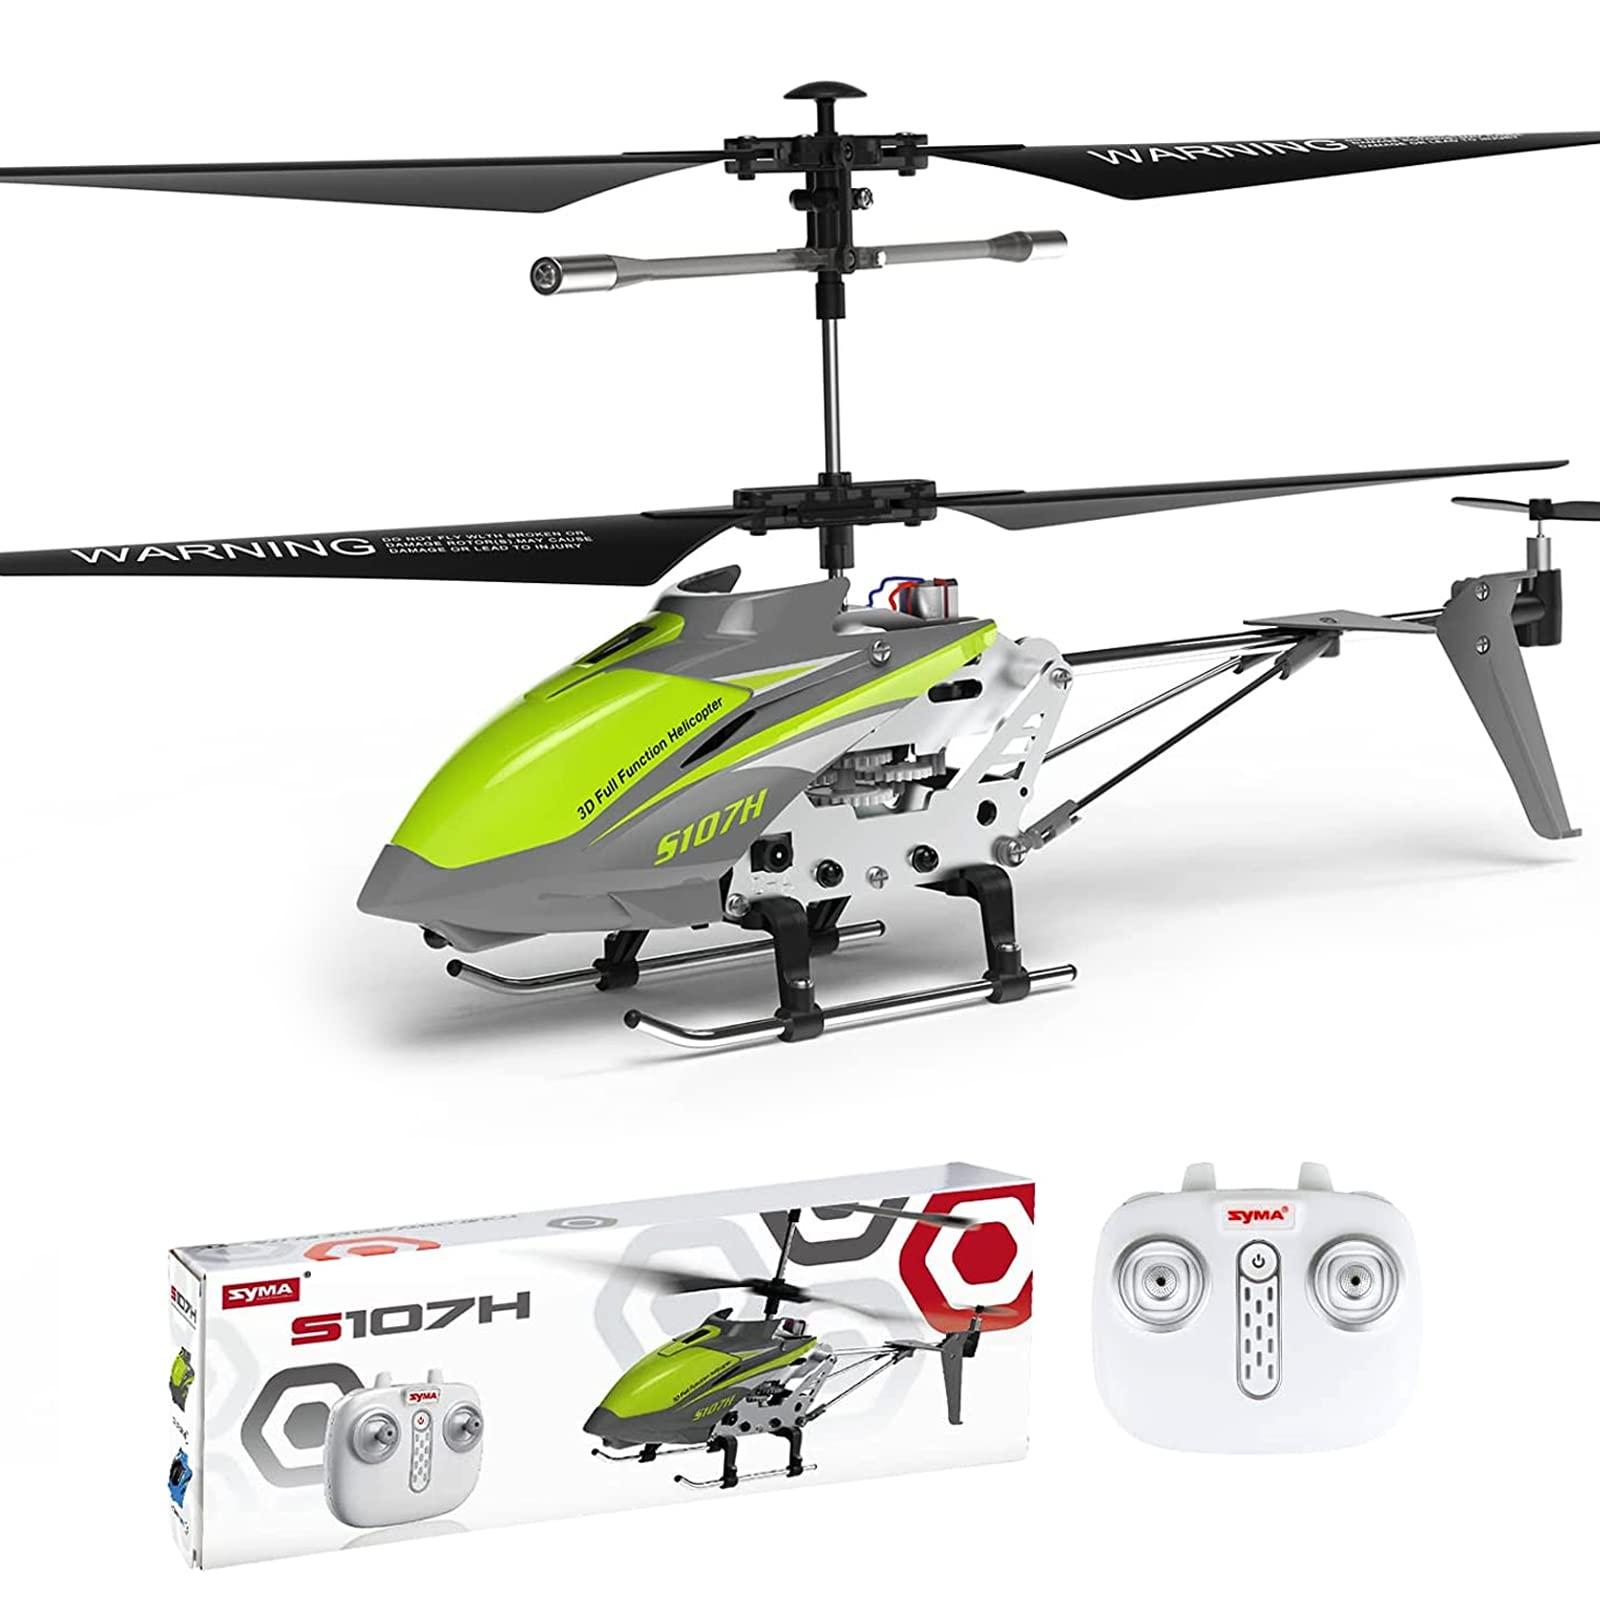 S107 Helicopter Toy: Positive Customer Feedback for s107 Helicopter Toy